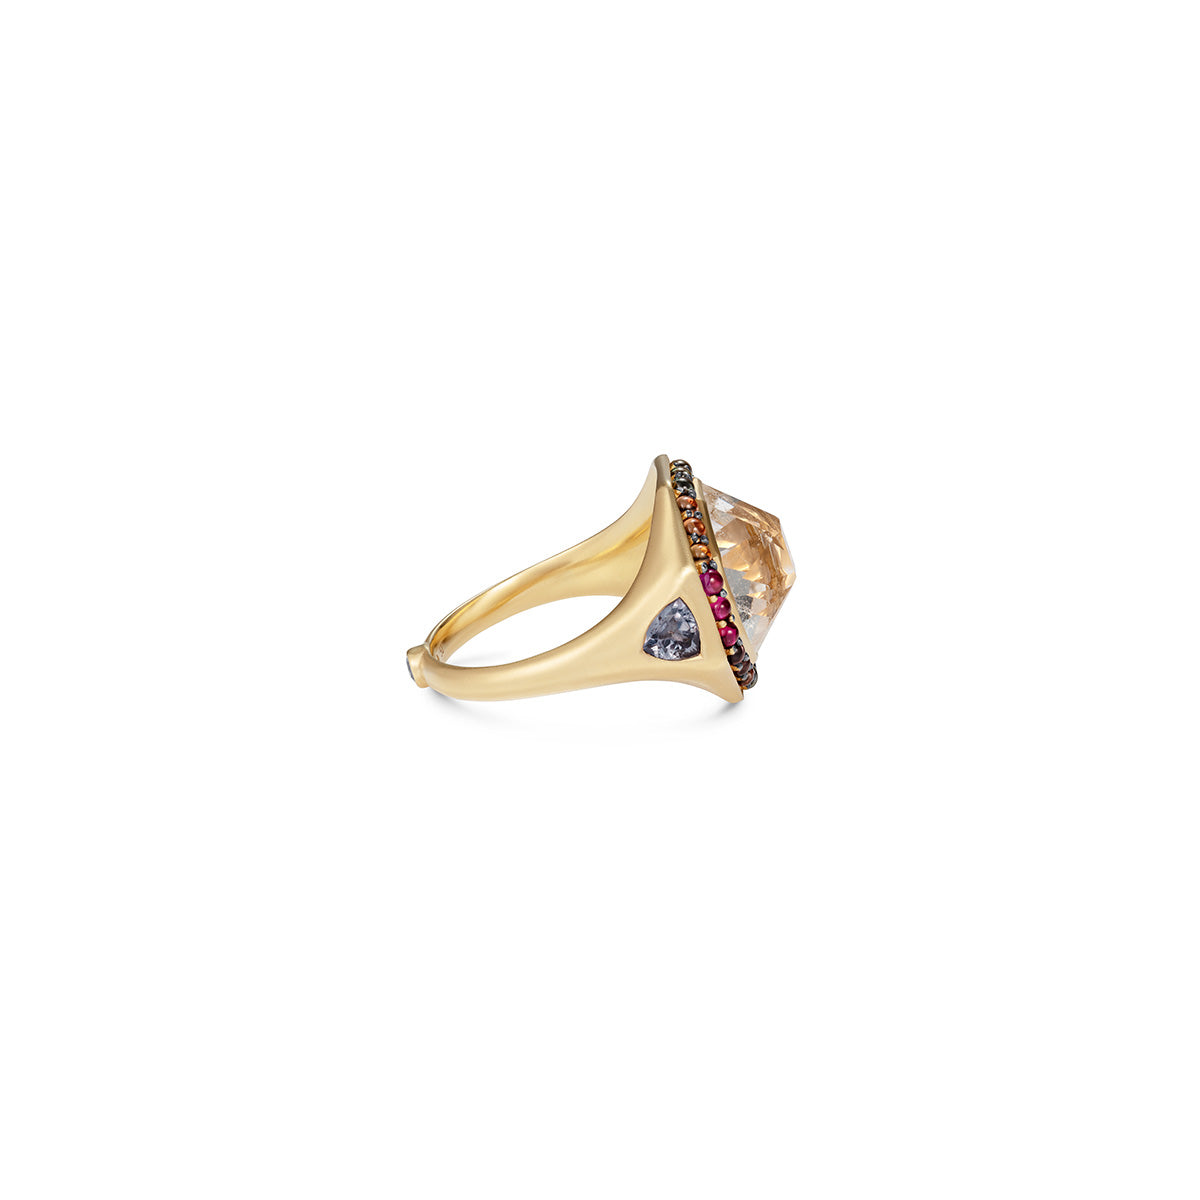 Noor Fares Octagonal Rock Crystal Ring with Coloured Sapphire Cabochon Pavé